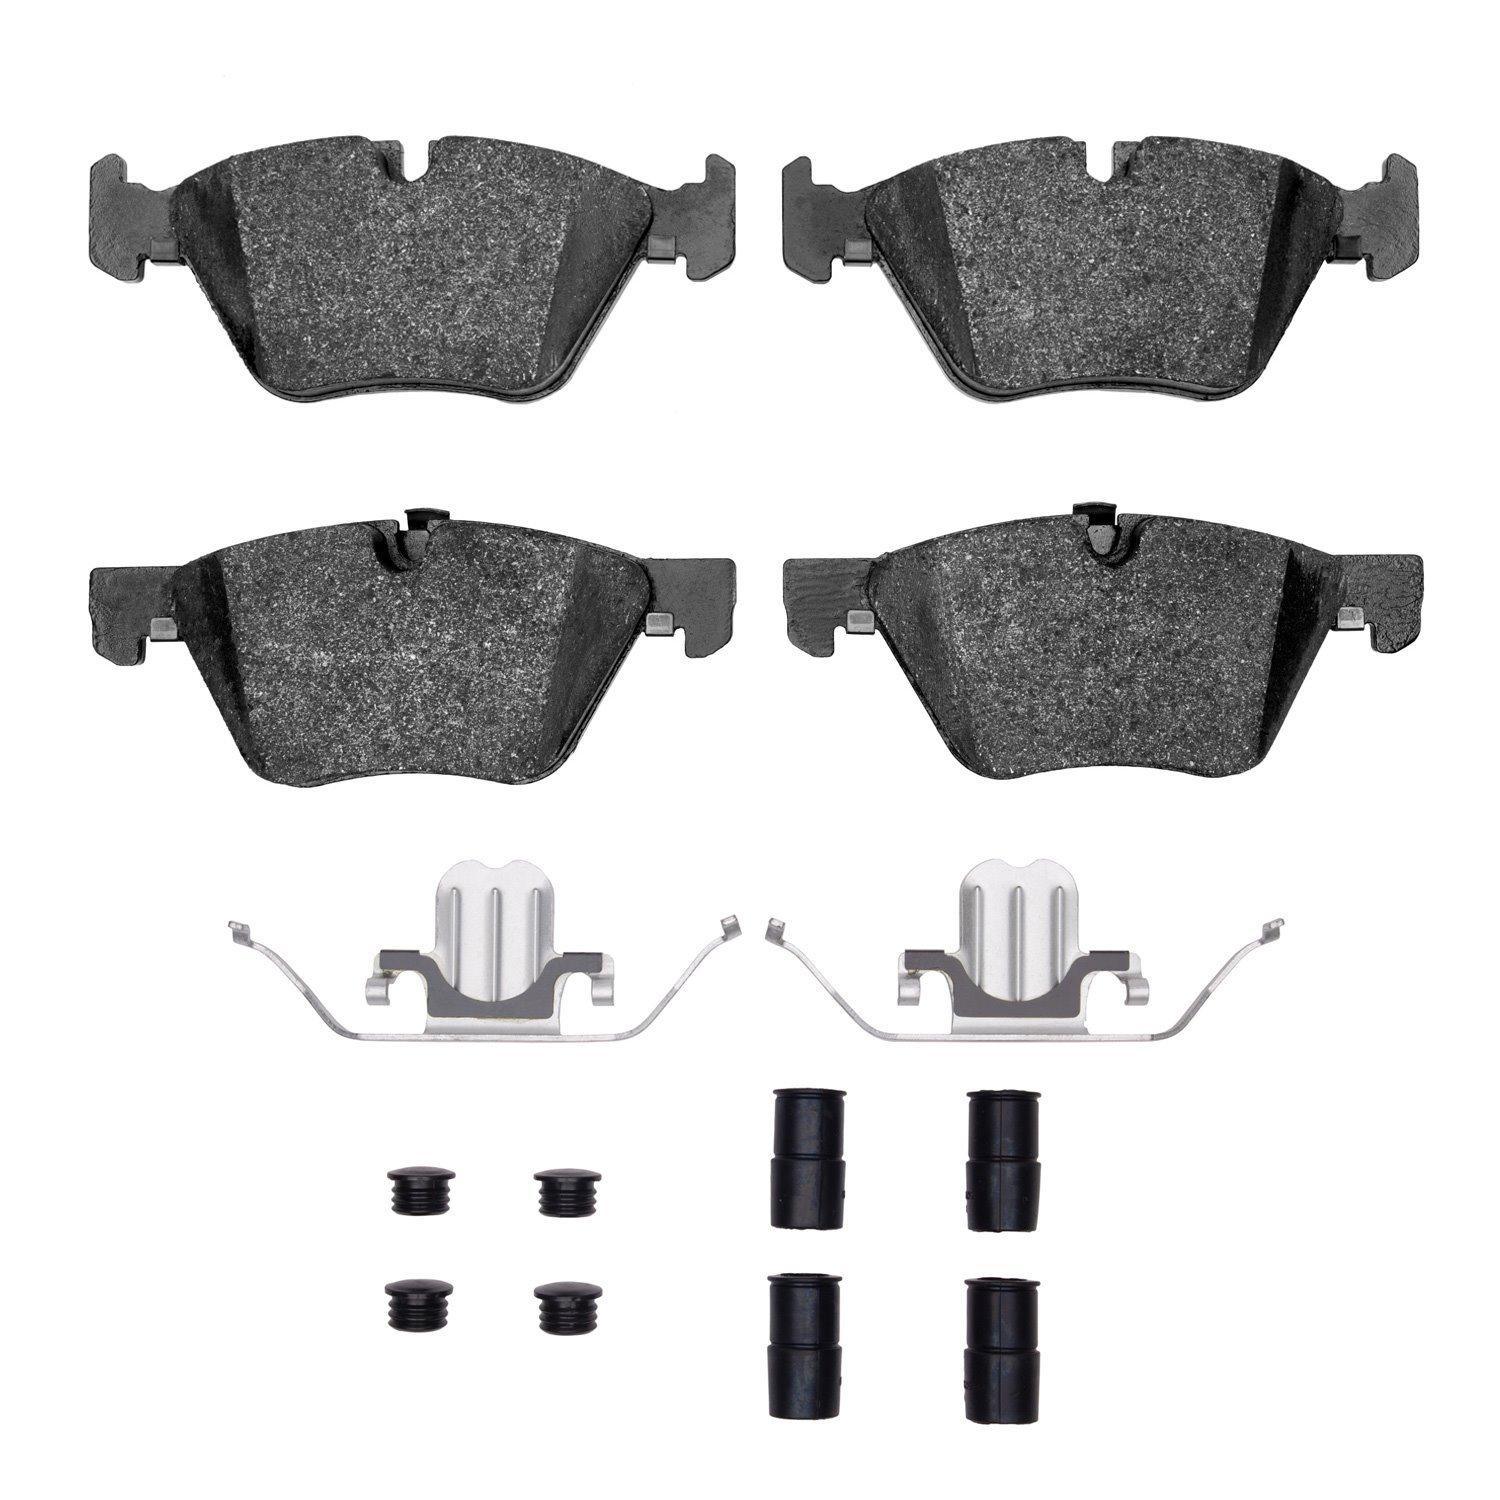 1115-1061-01 Active Performance Brake Pads & Hardware Kit, Fits Select BMW, Position: Front